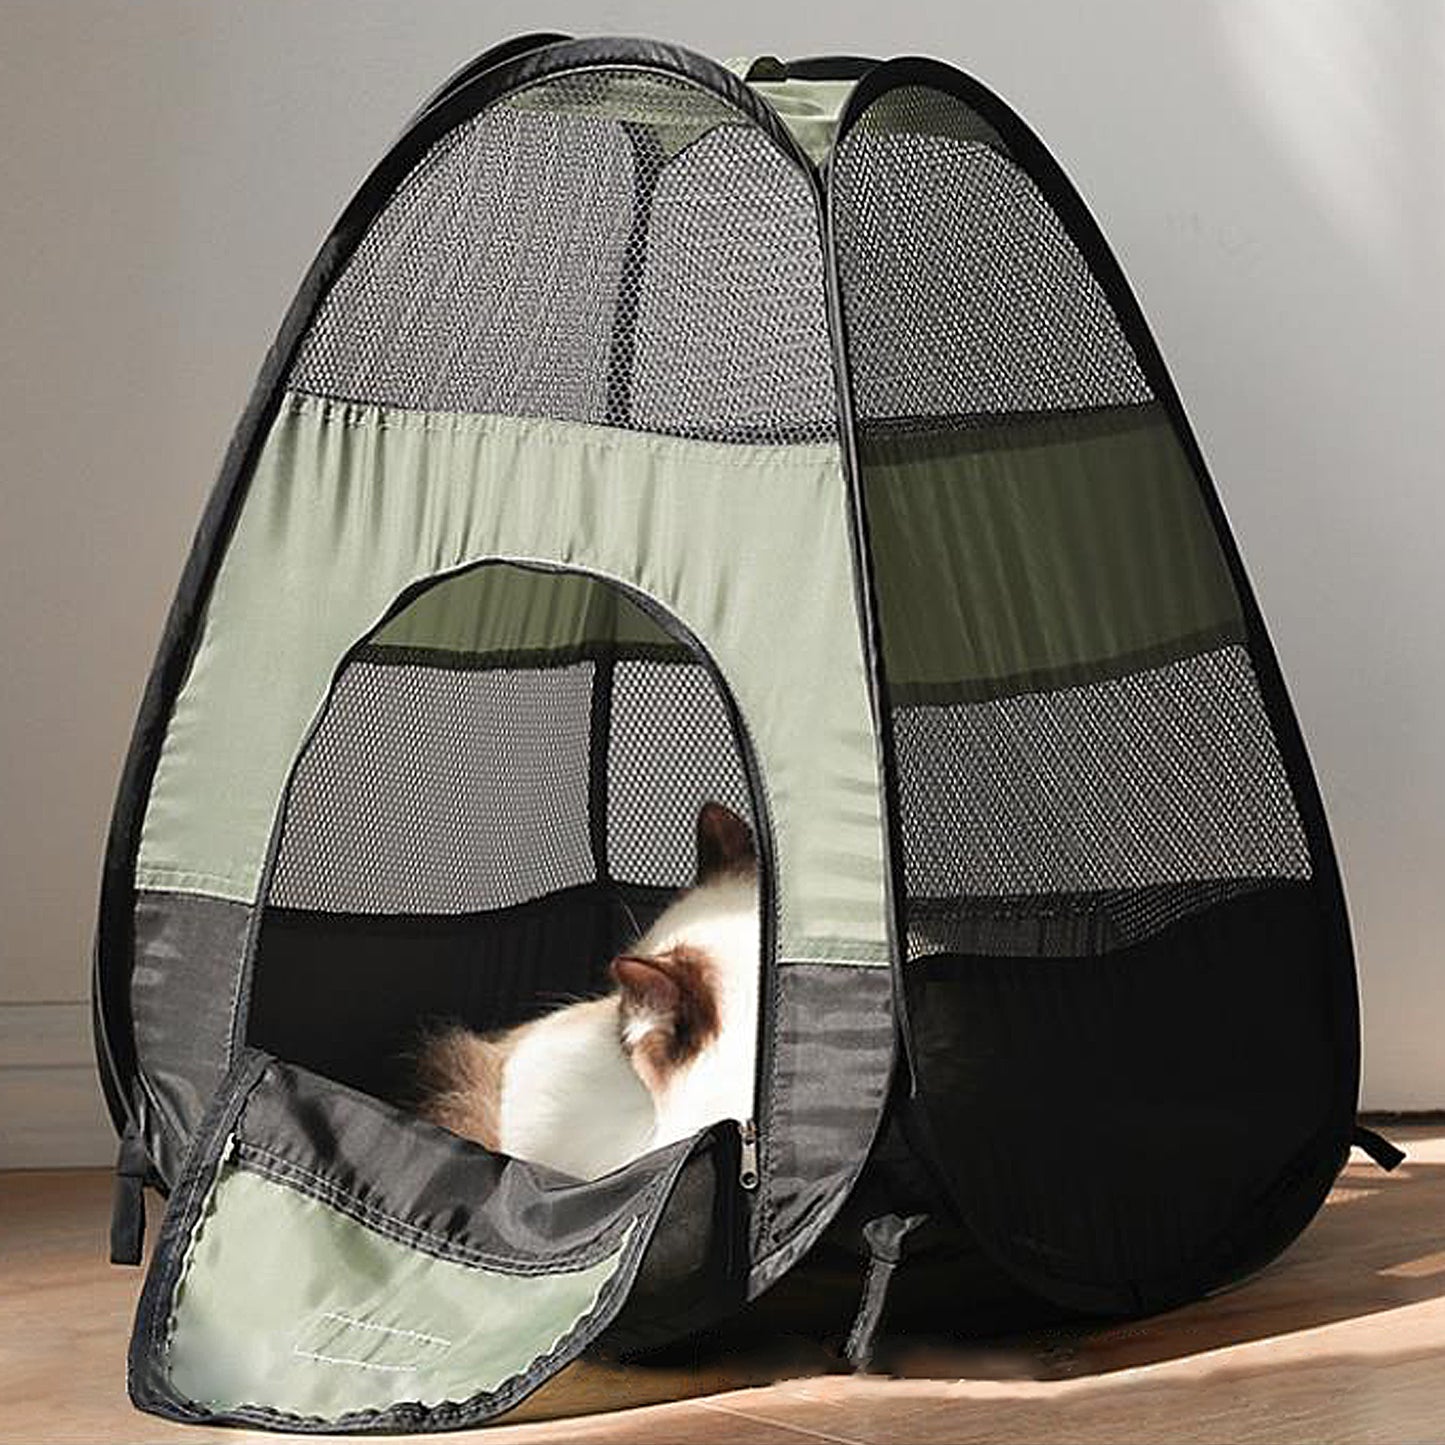 Sugeryy Yard Fence Pet Cage Removable Breathable Outdoor Folding Mesh Dog Tent